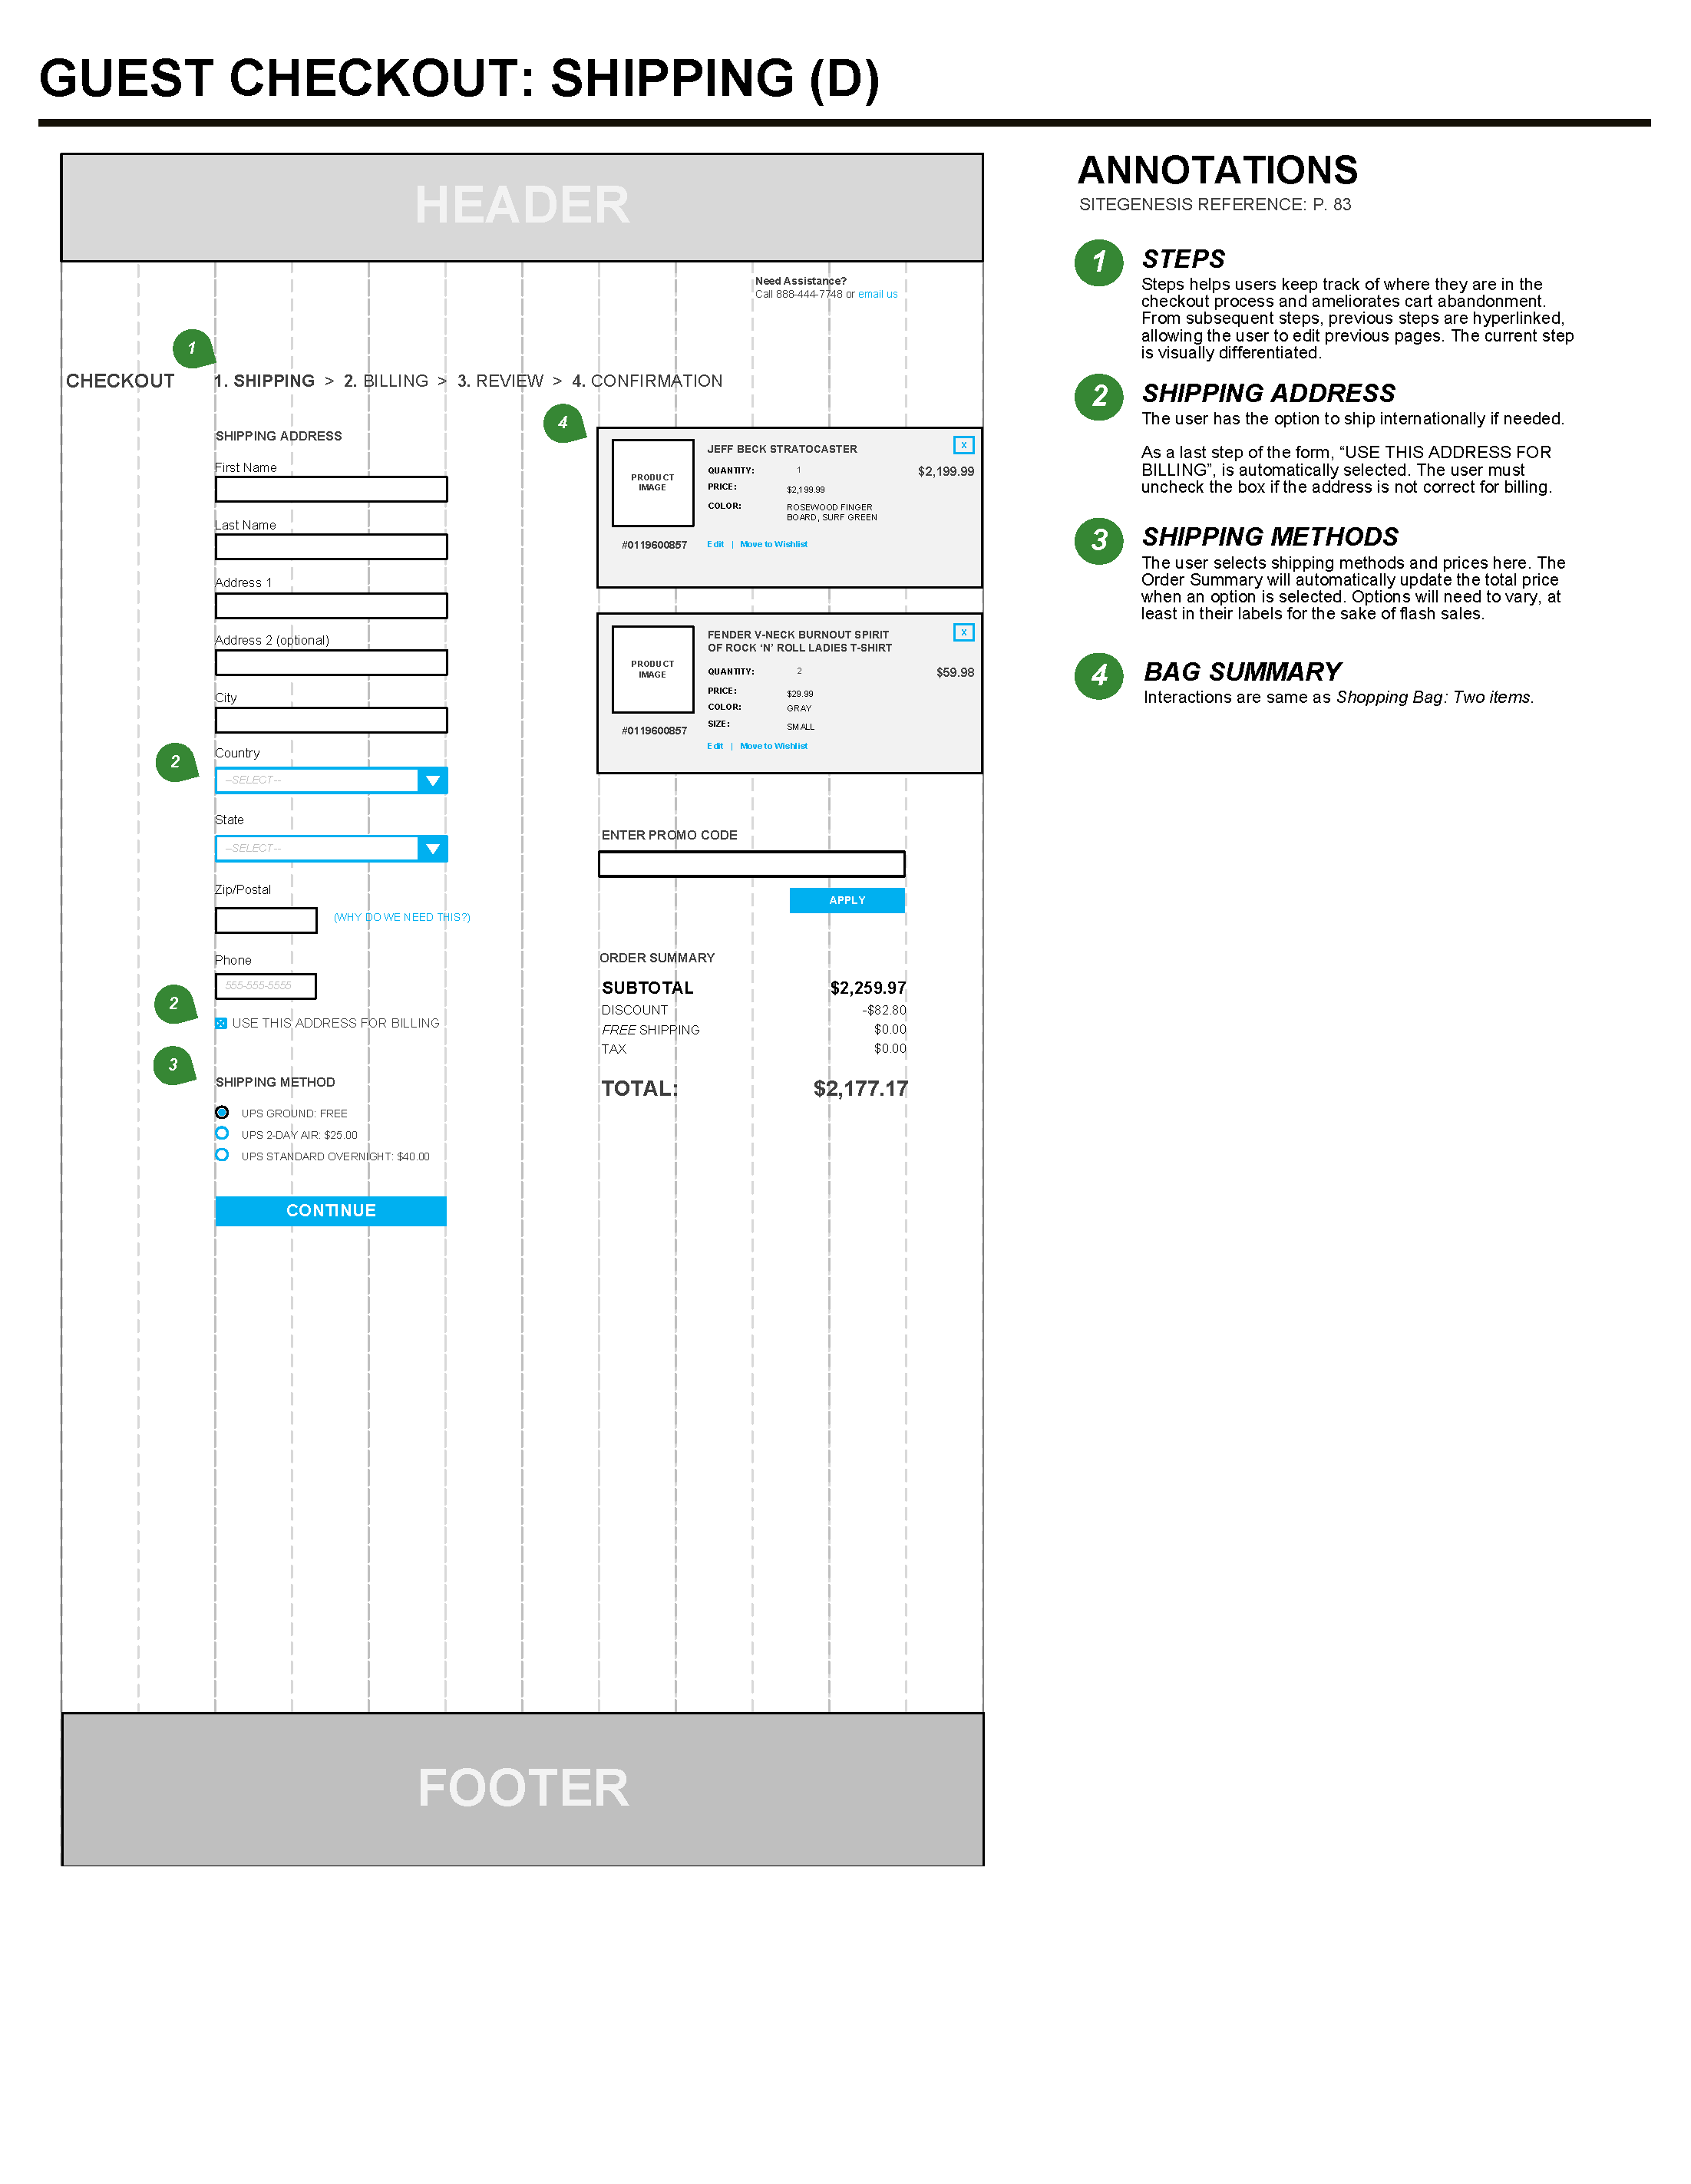 Fender_Wireframe_Checkout_V2.0_Page_08.png